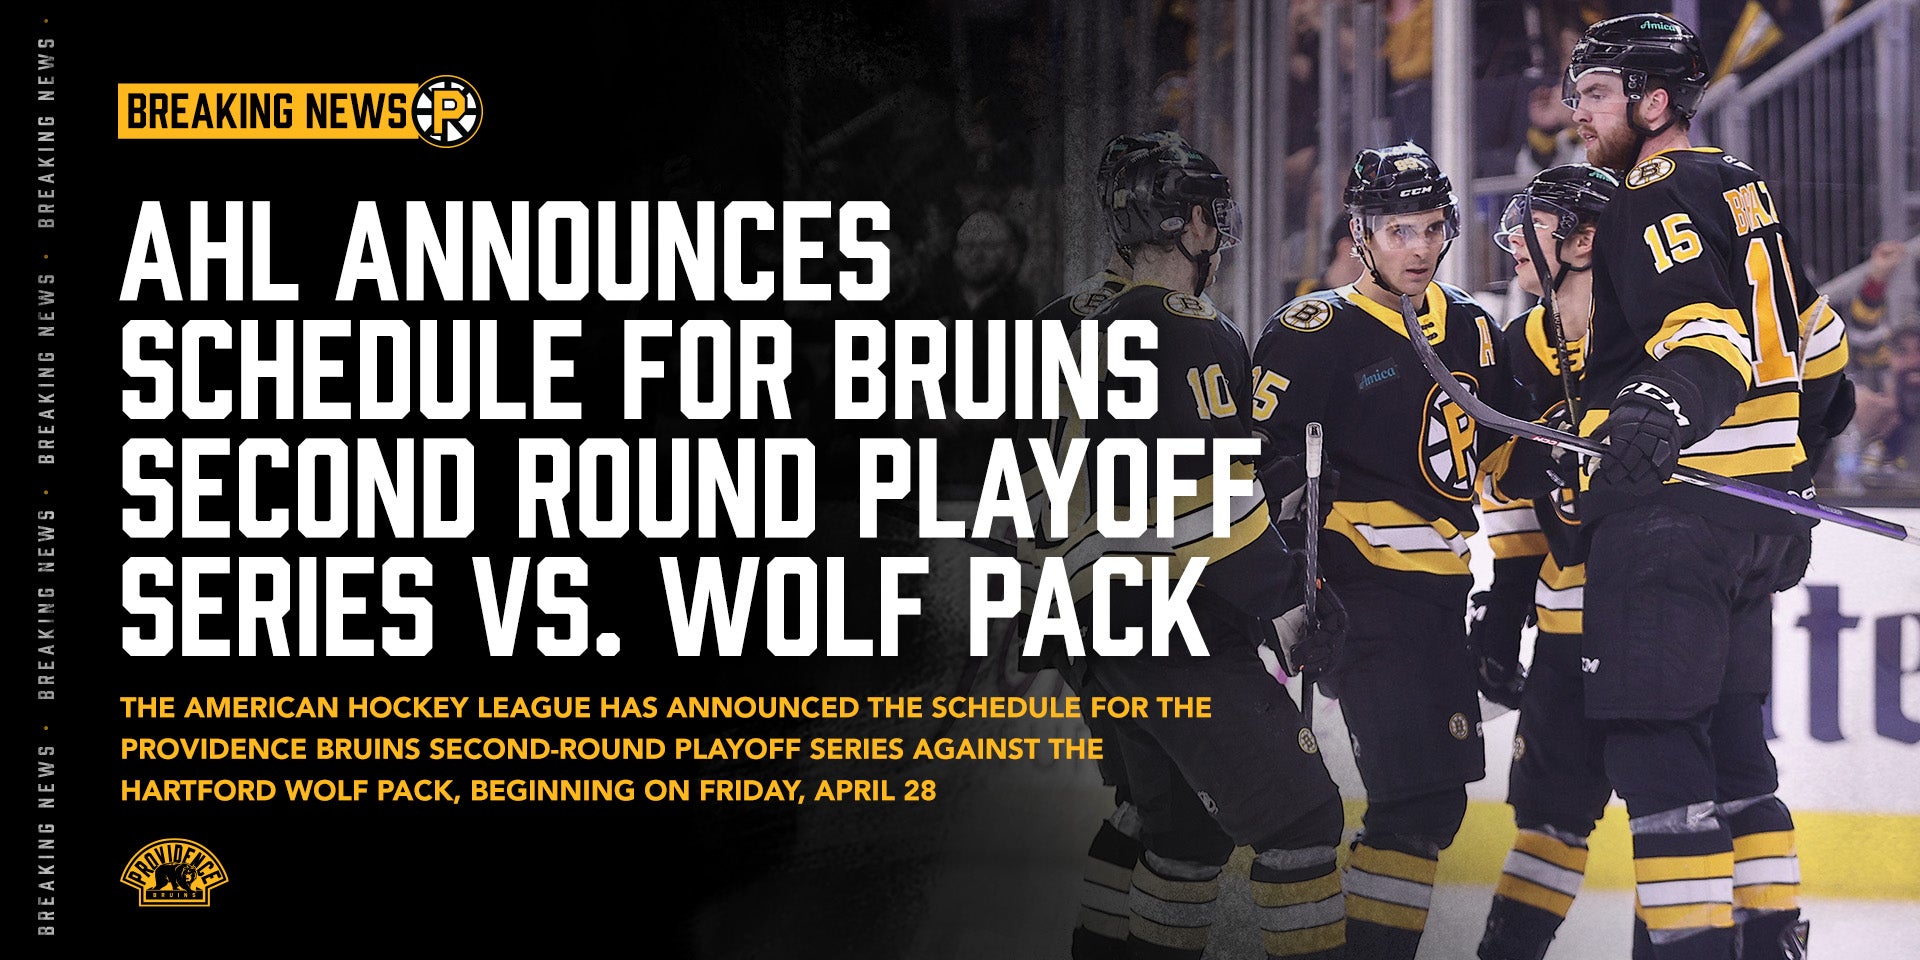 AHL ANNOUNCES SCHEDULE FOR BRUINS SECOND ROUND PLAYOFF SERIES VS